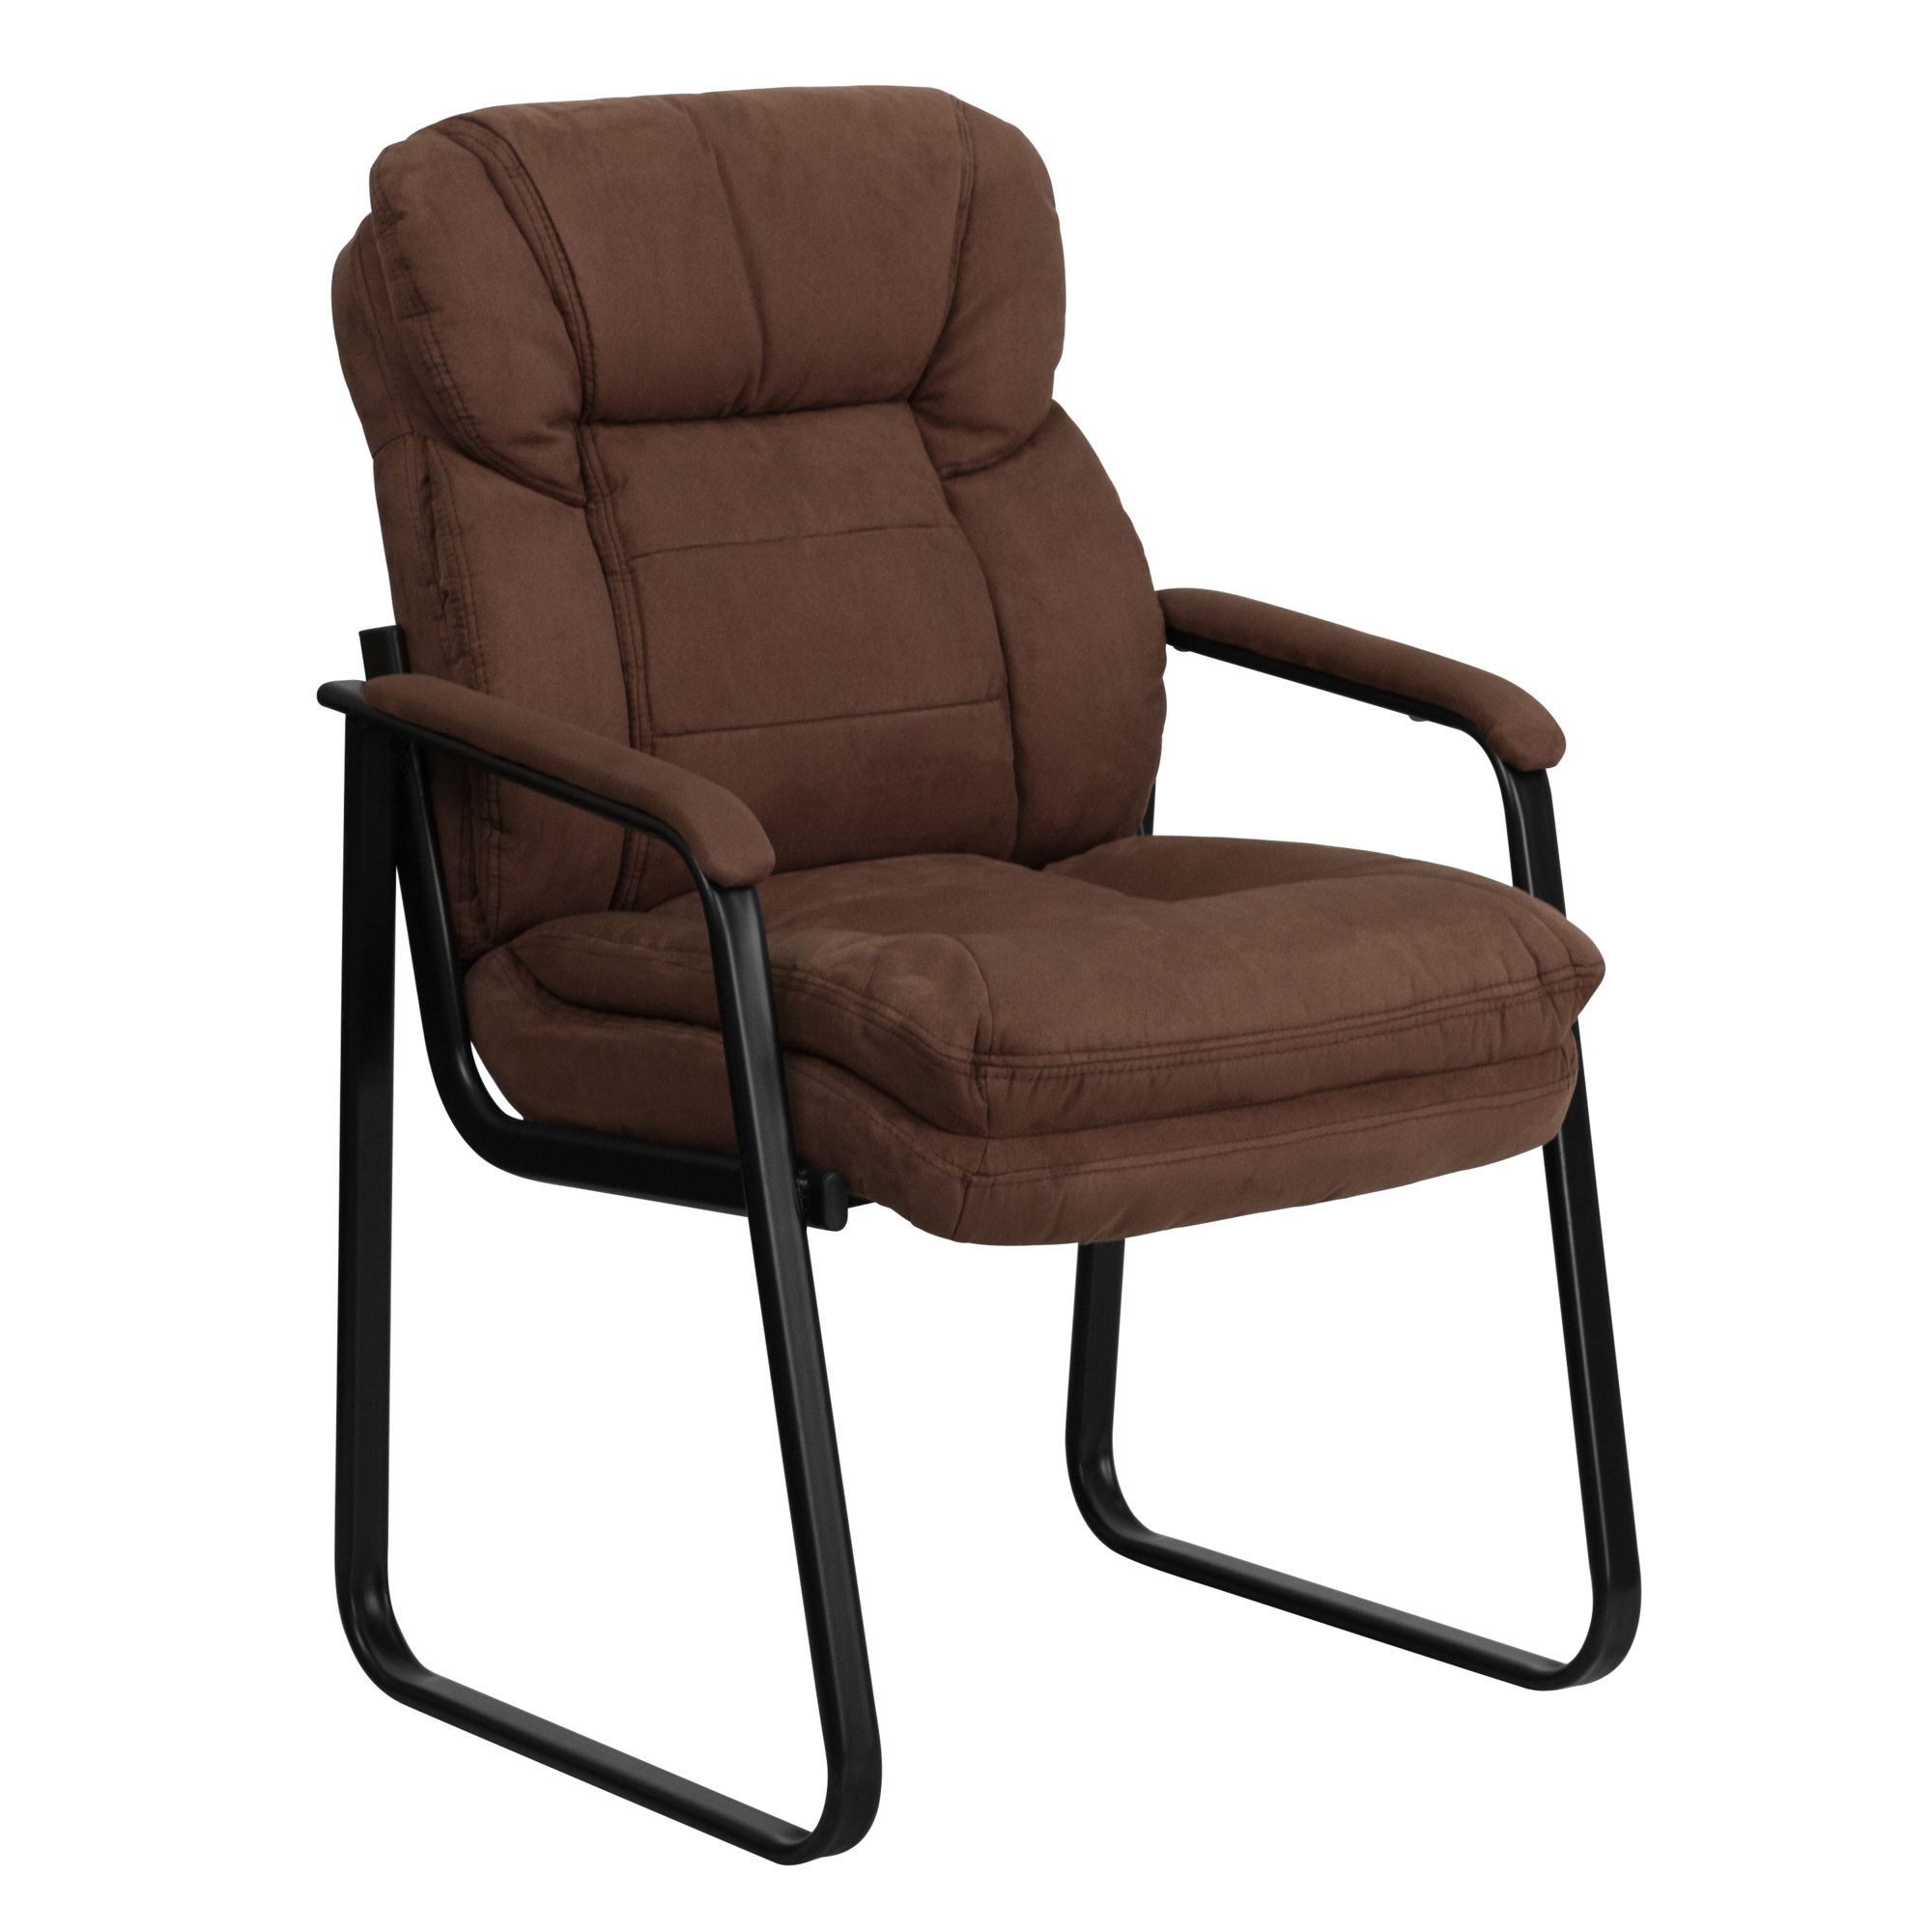 Flash Furniture, Brown MIC Executive Chair with Lumbar Support, Primary Color Brown, Included (qty.) 1, Model GO1156BN